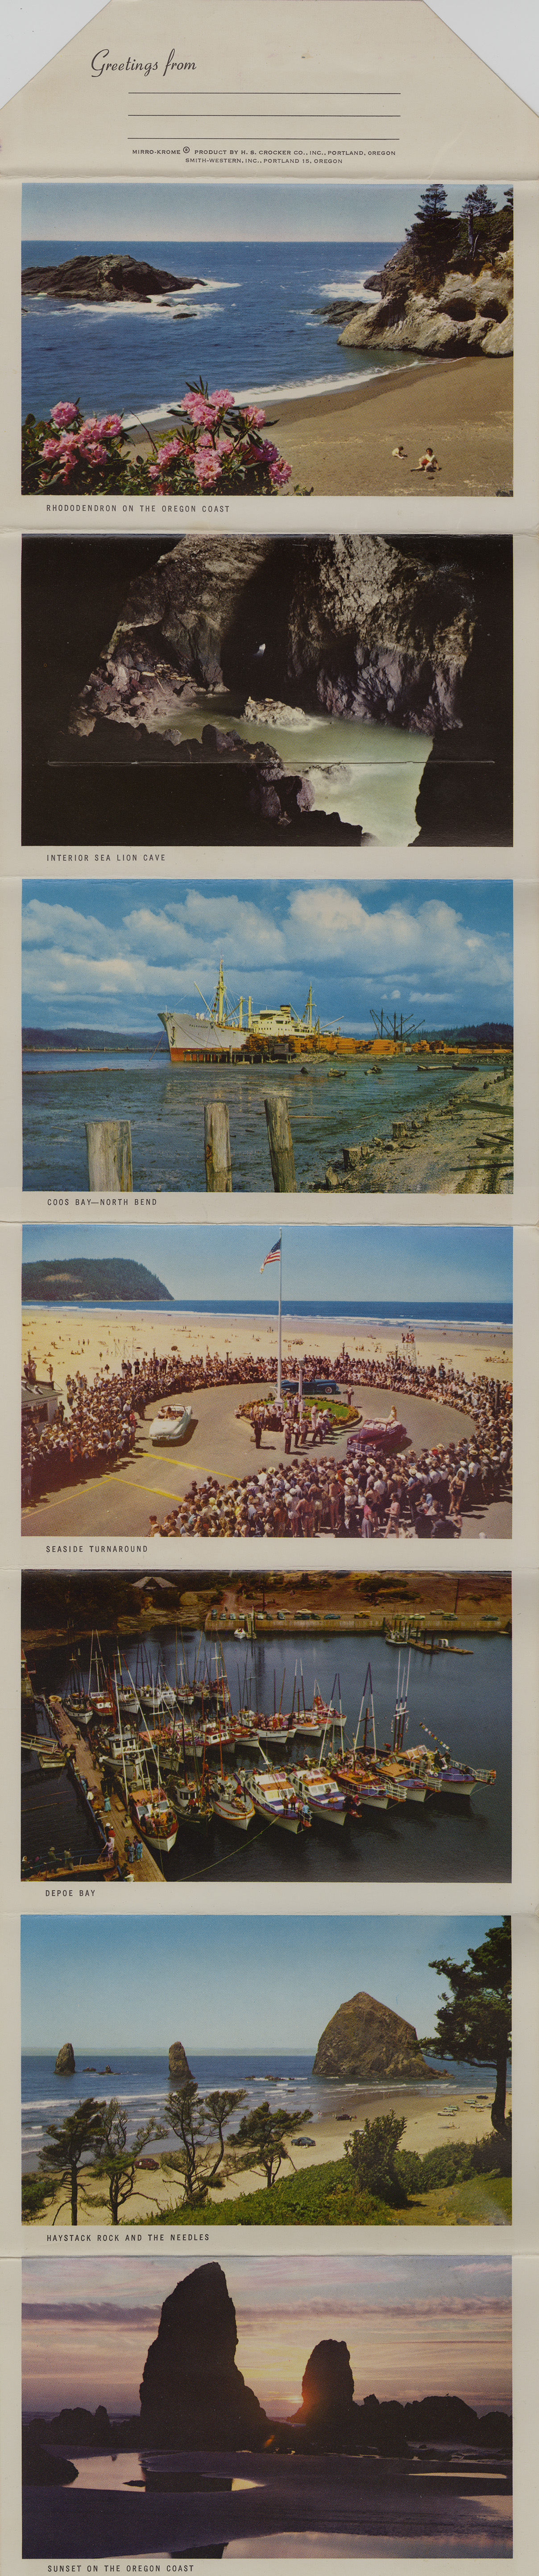 Greetings from the Scenic Oregon Coast  Northwest Historical Postcards  Collection